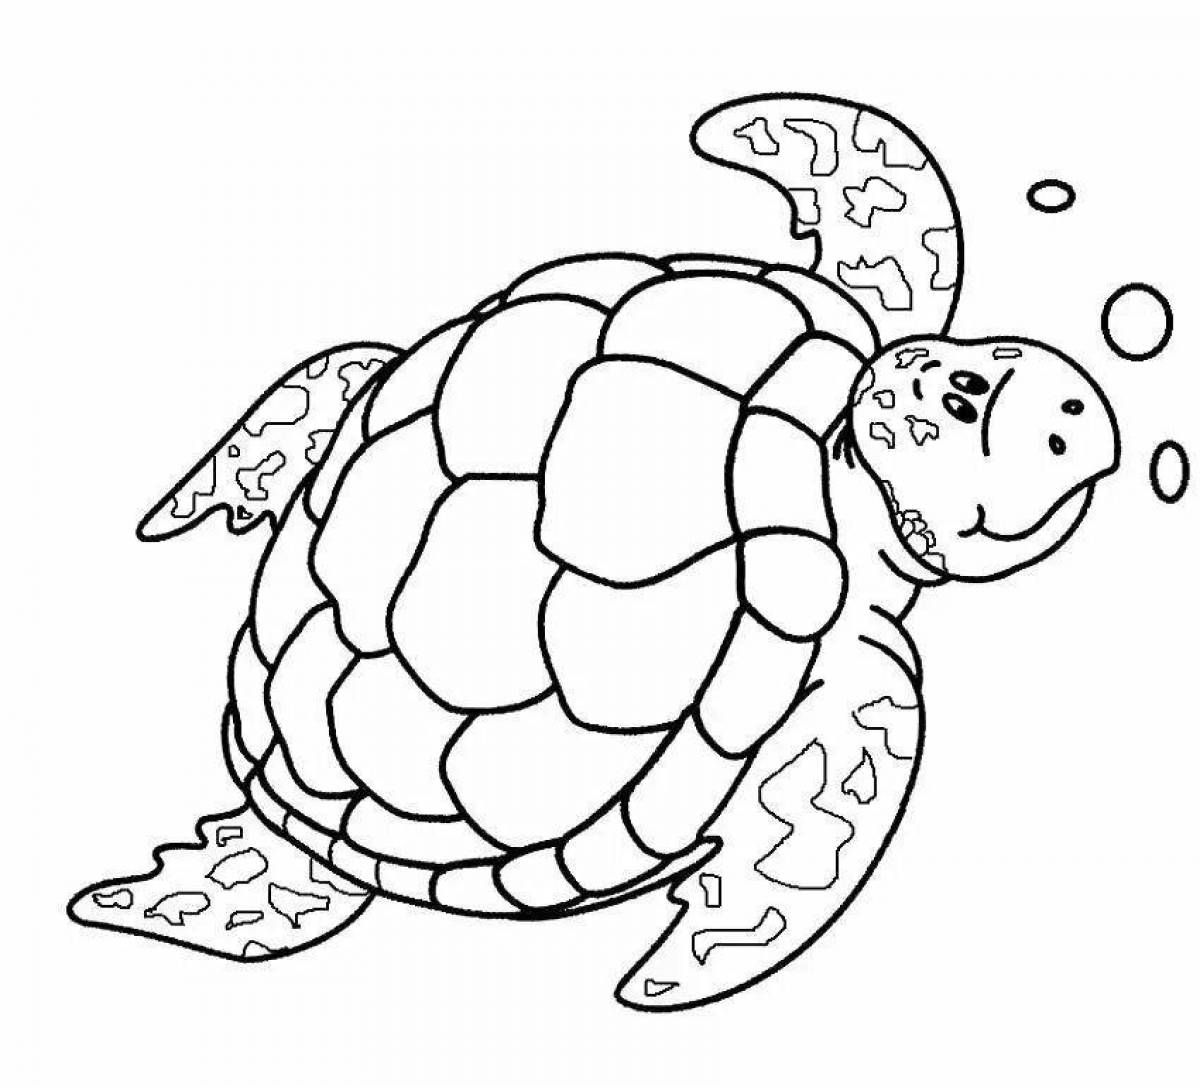 Merry turtle coloring book for kids